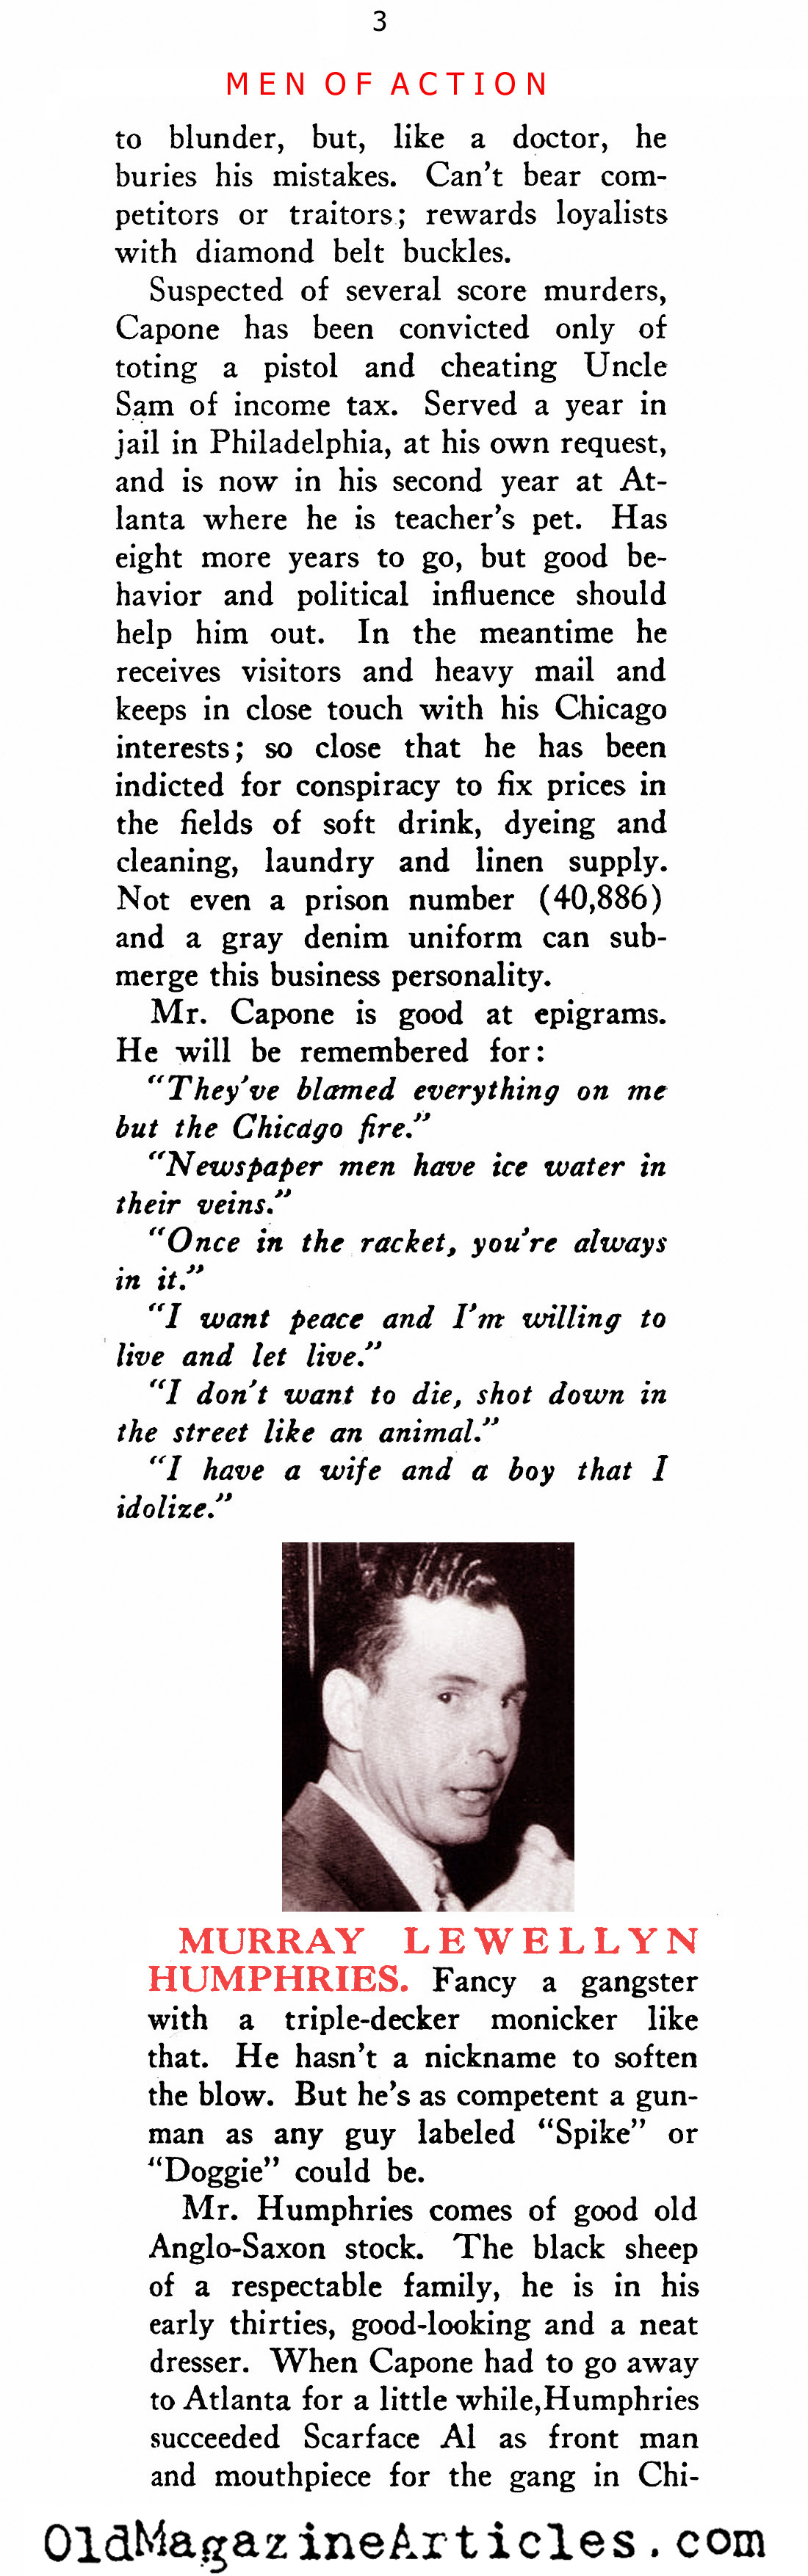 The Mobsters (New Outlook Magazine, 1933)